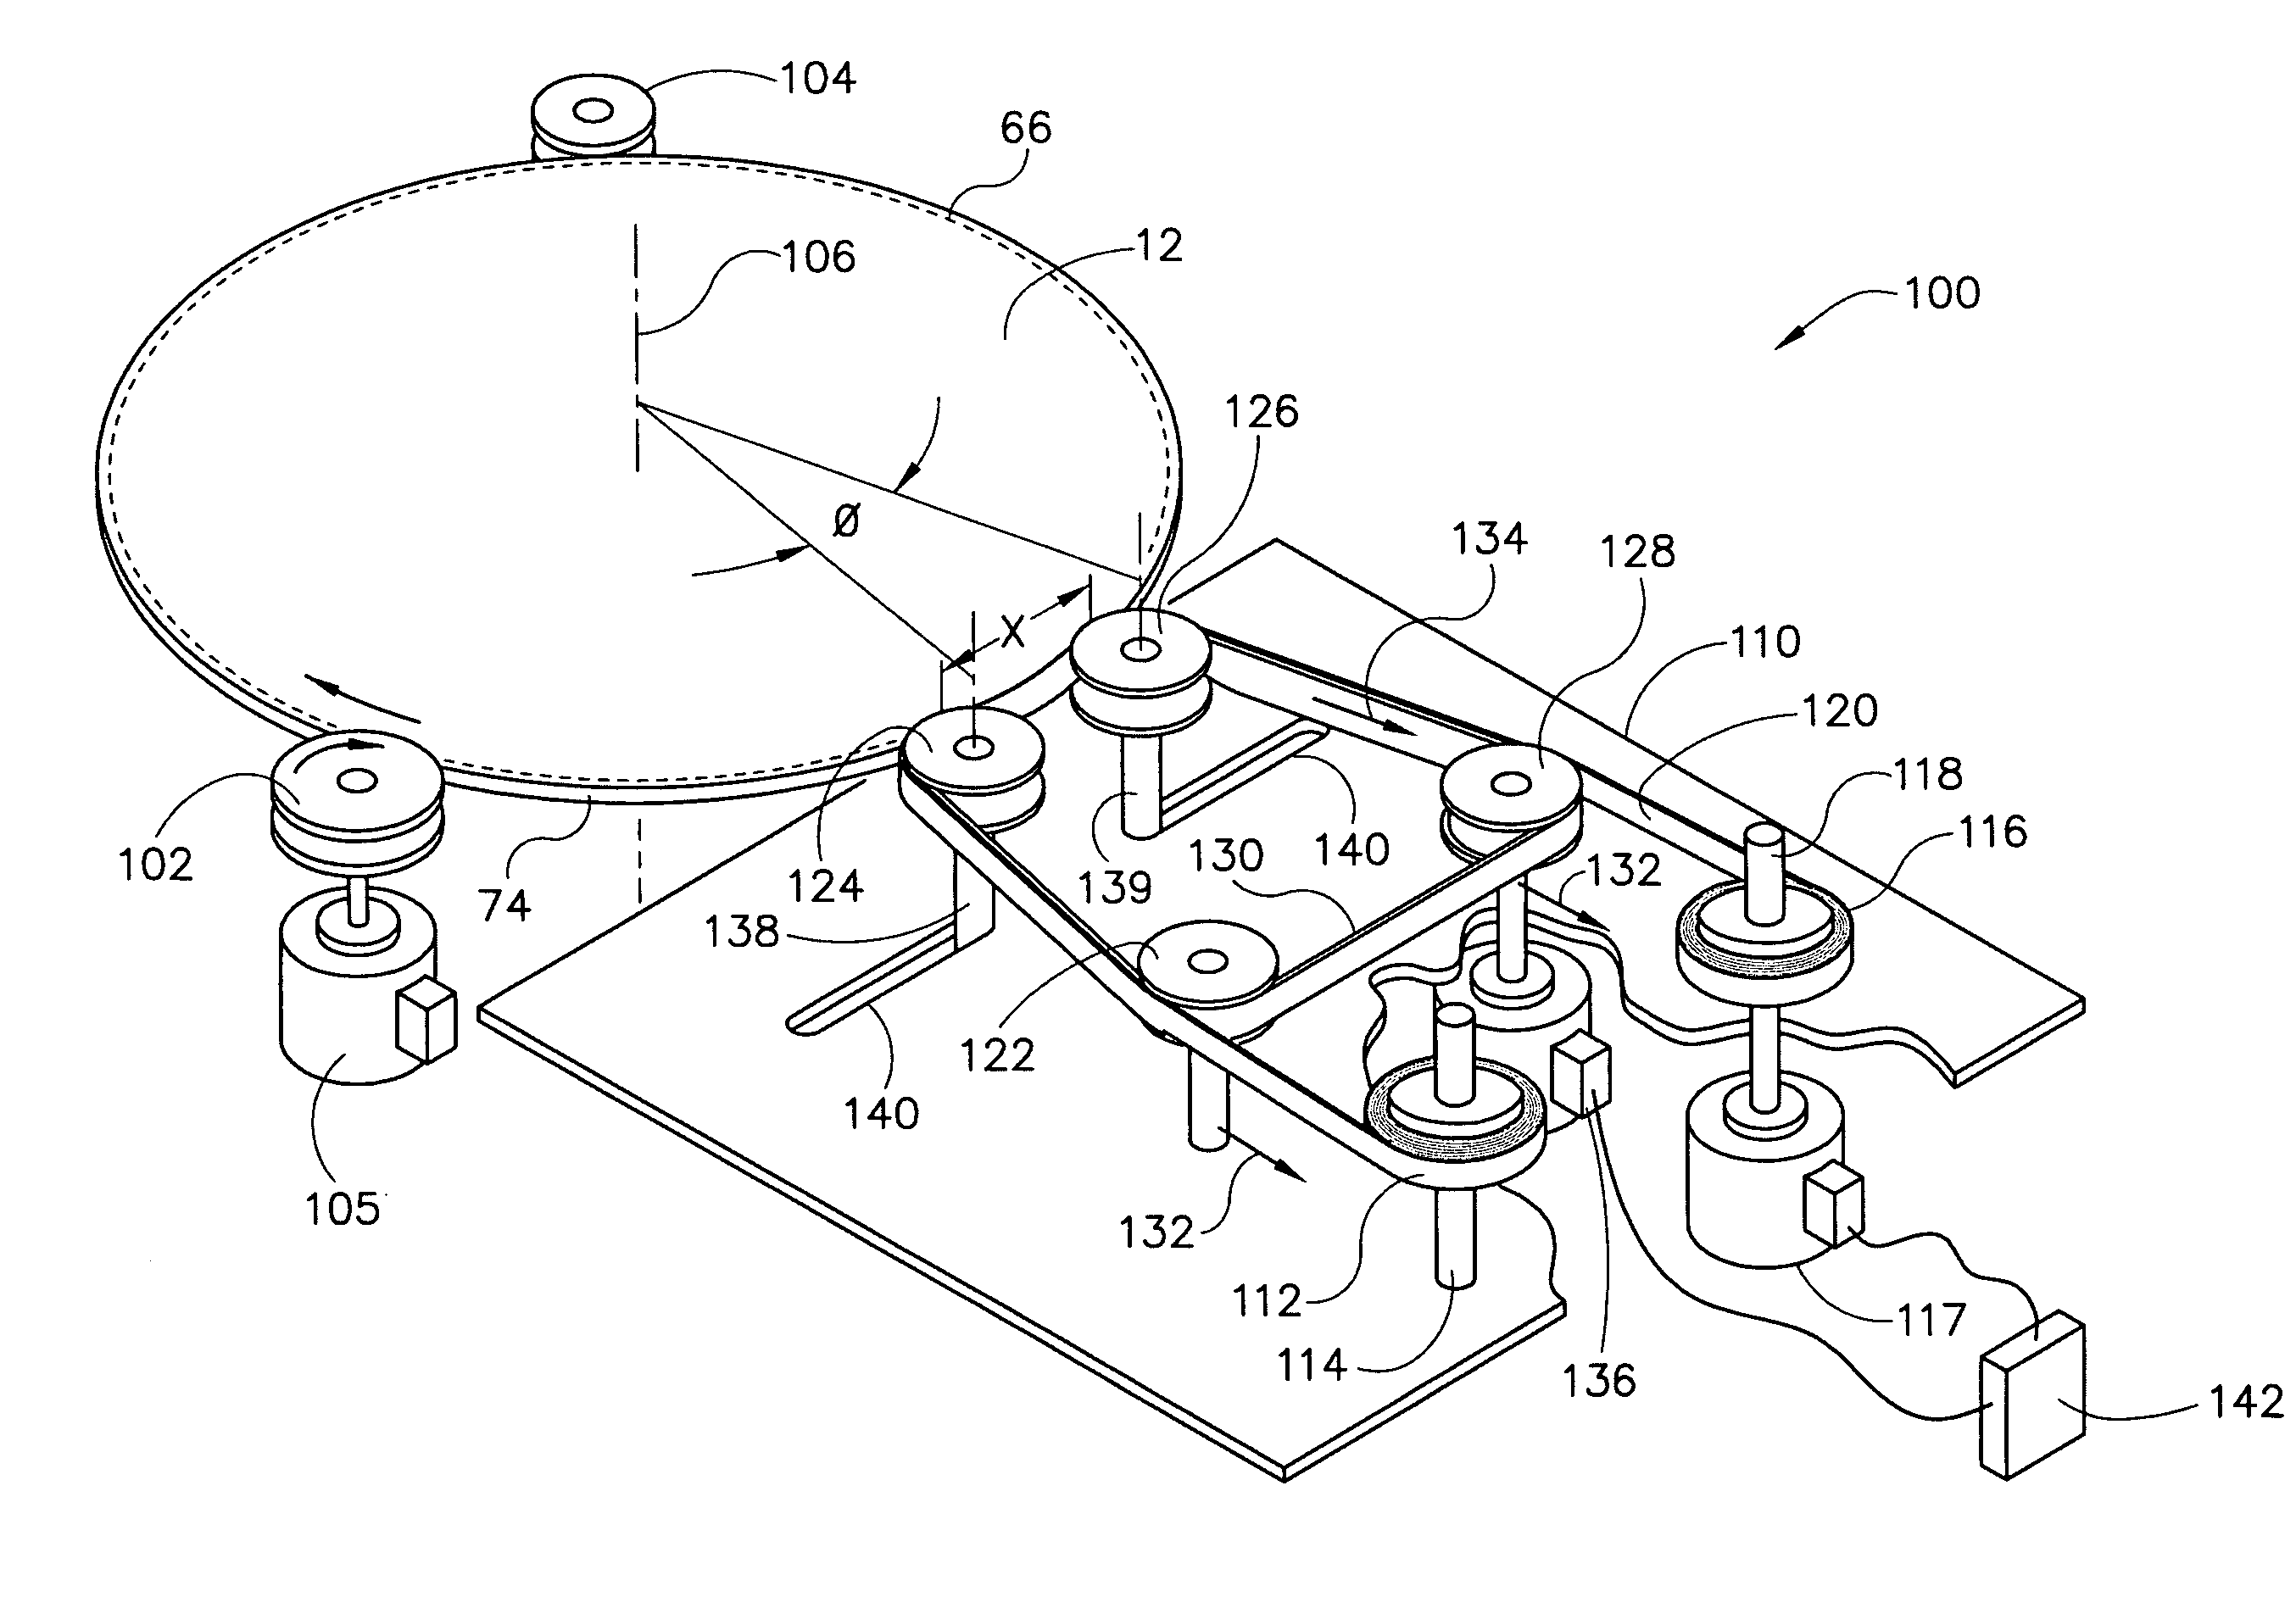 Process tape for cleaning or processing the edge of a semiconductor wafer